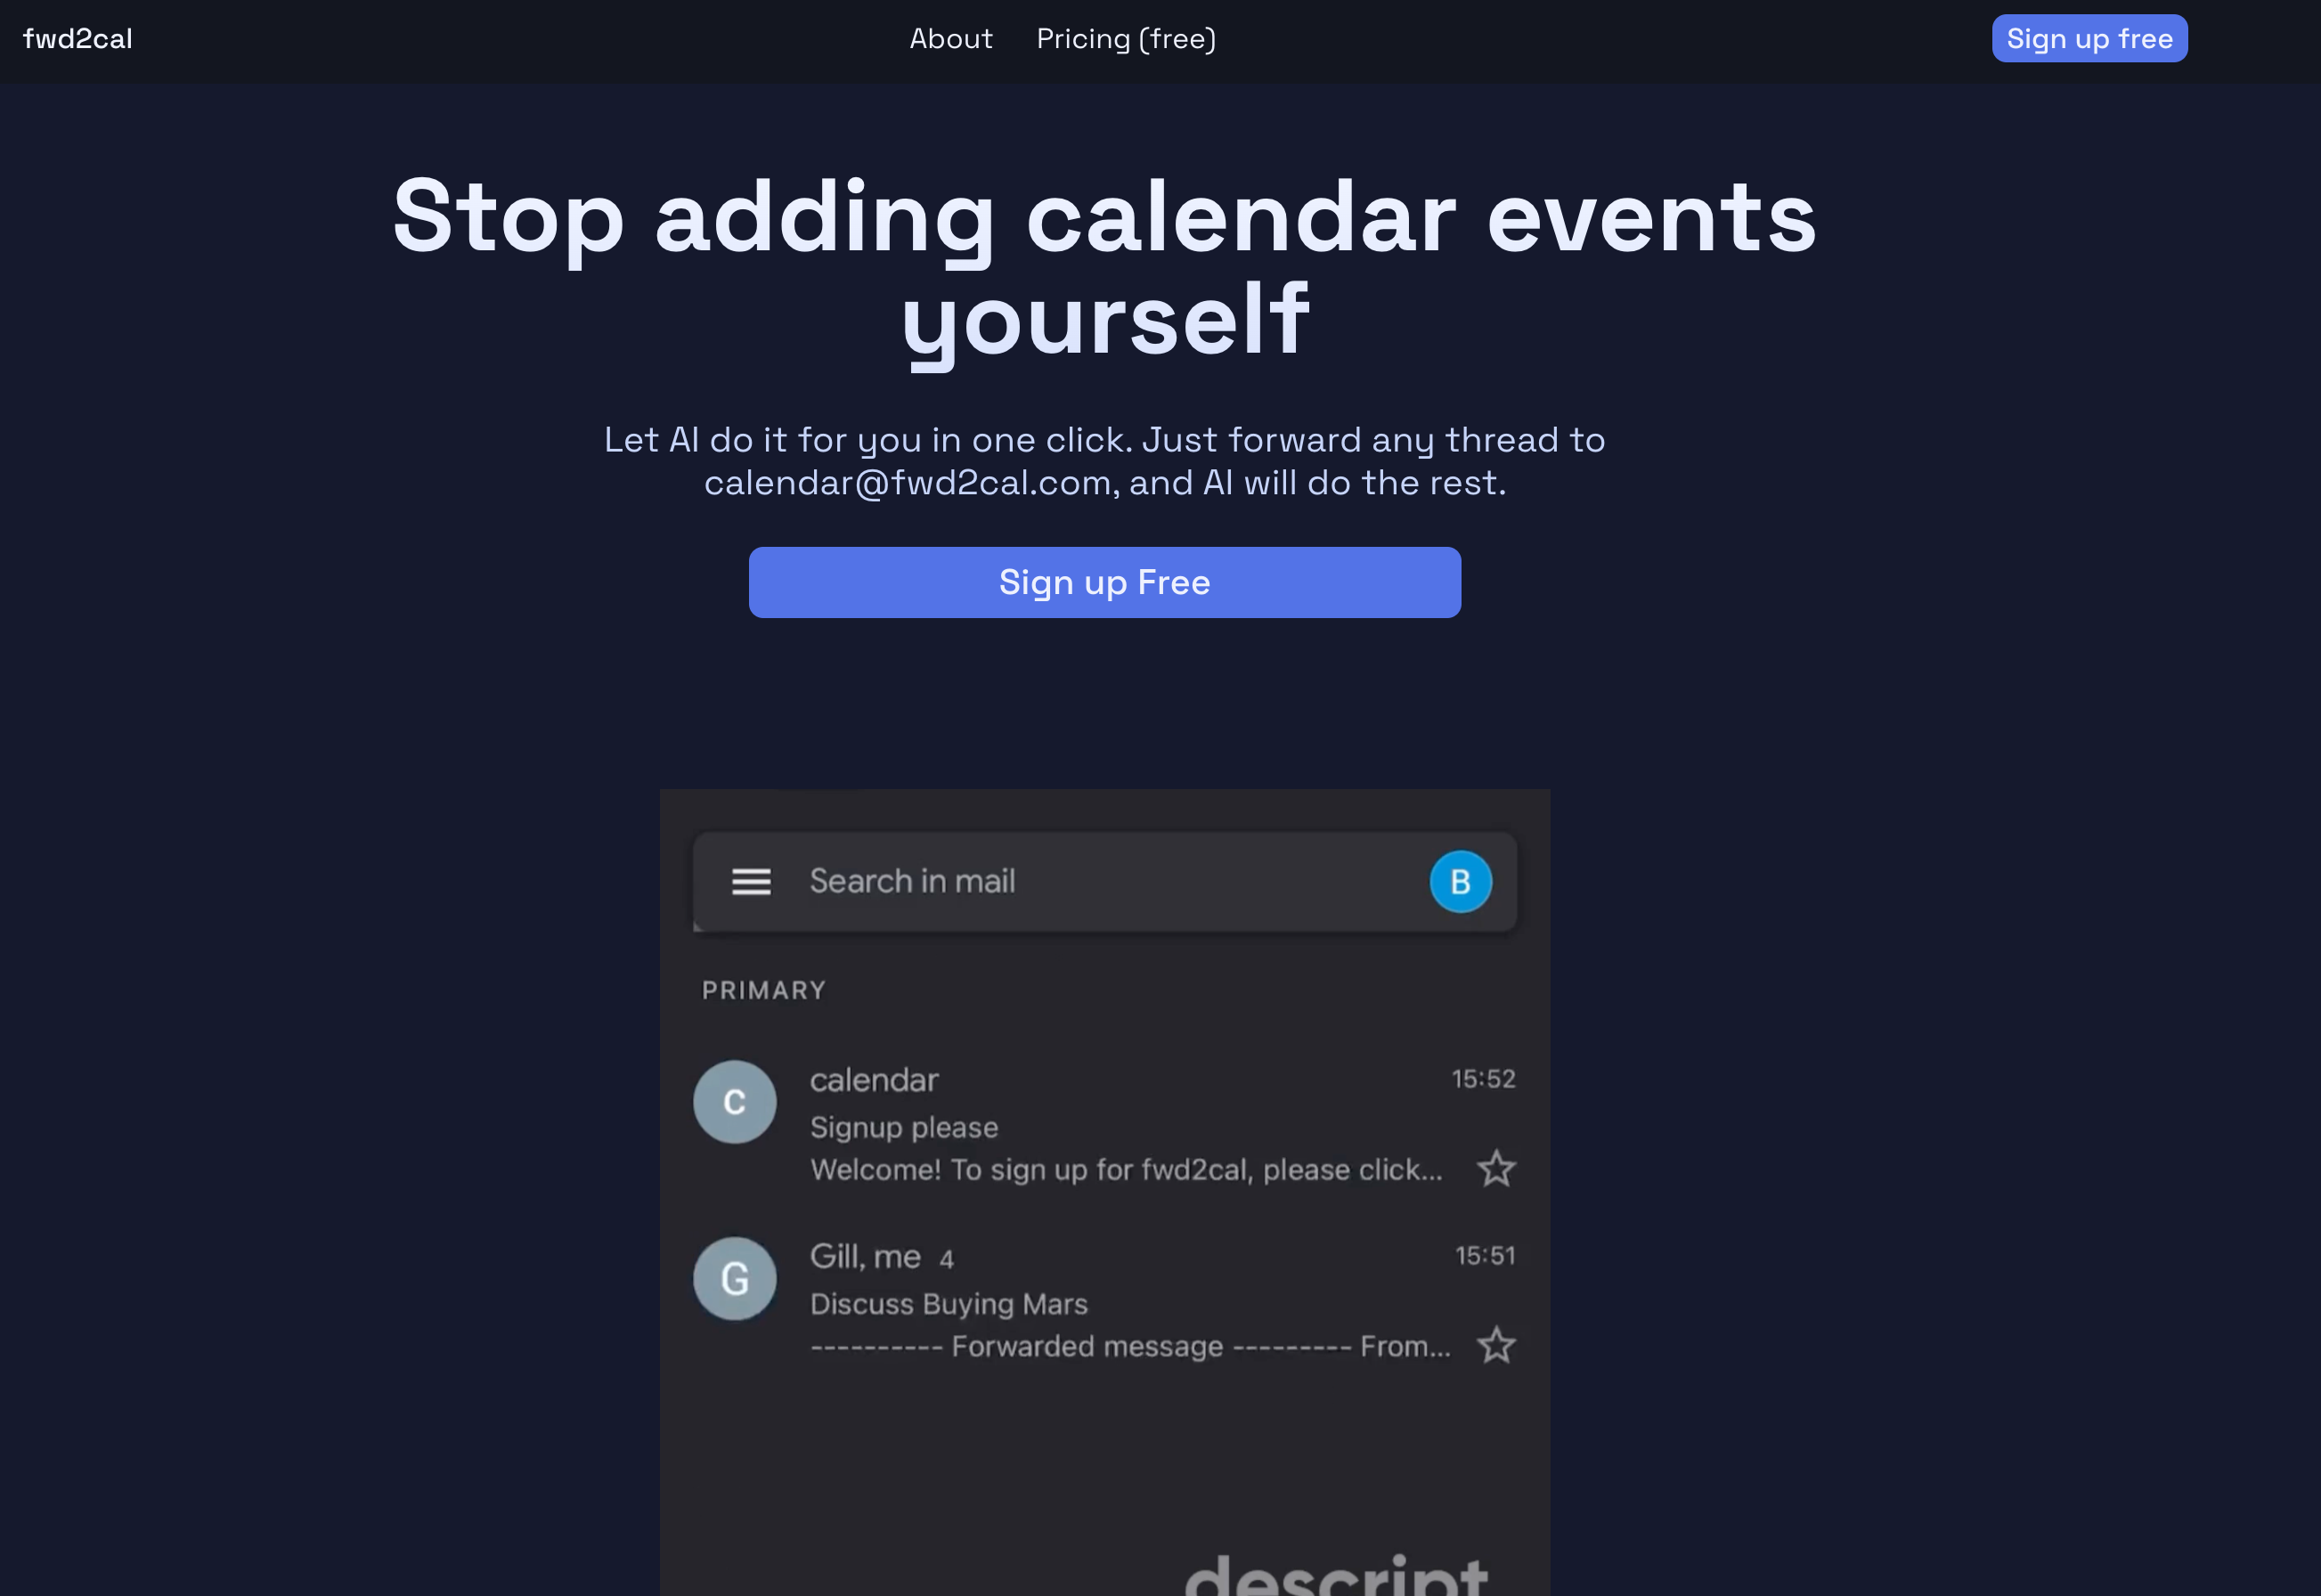 fwd2cal - Forward email, get a calendar invite - that's it